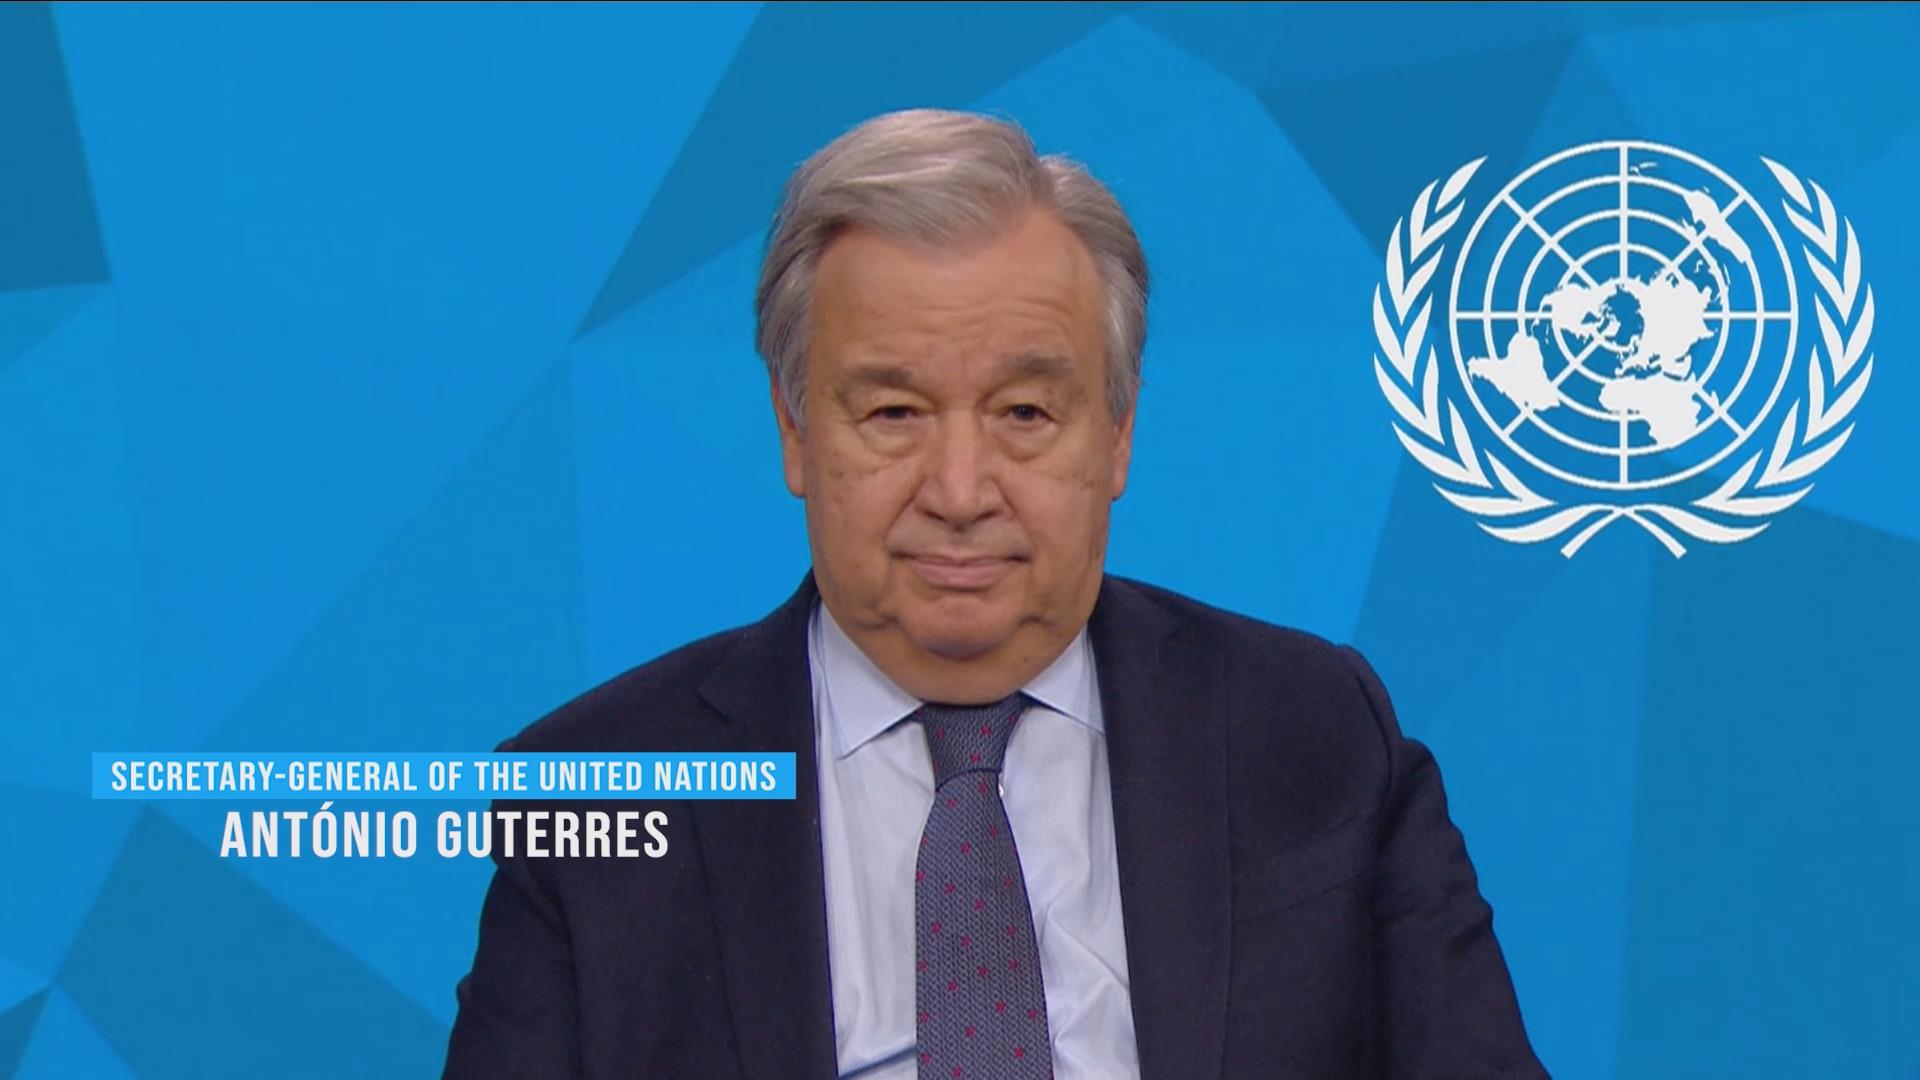 Full speech text of UN Secretary-General’s Video Message to the World Internet of Things Convention